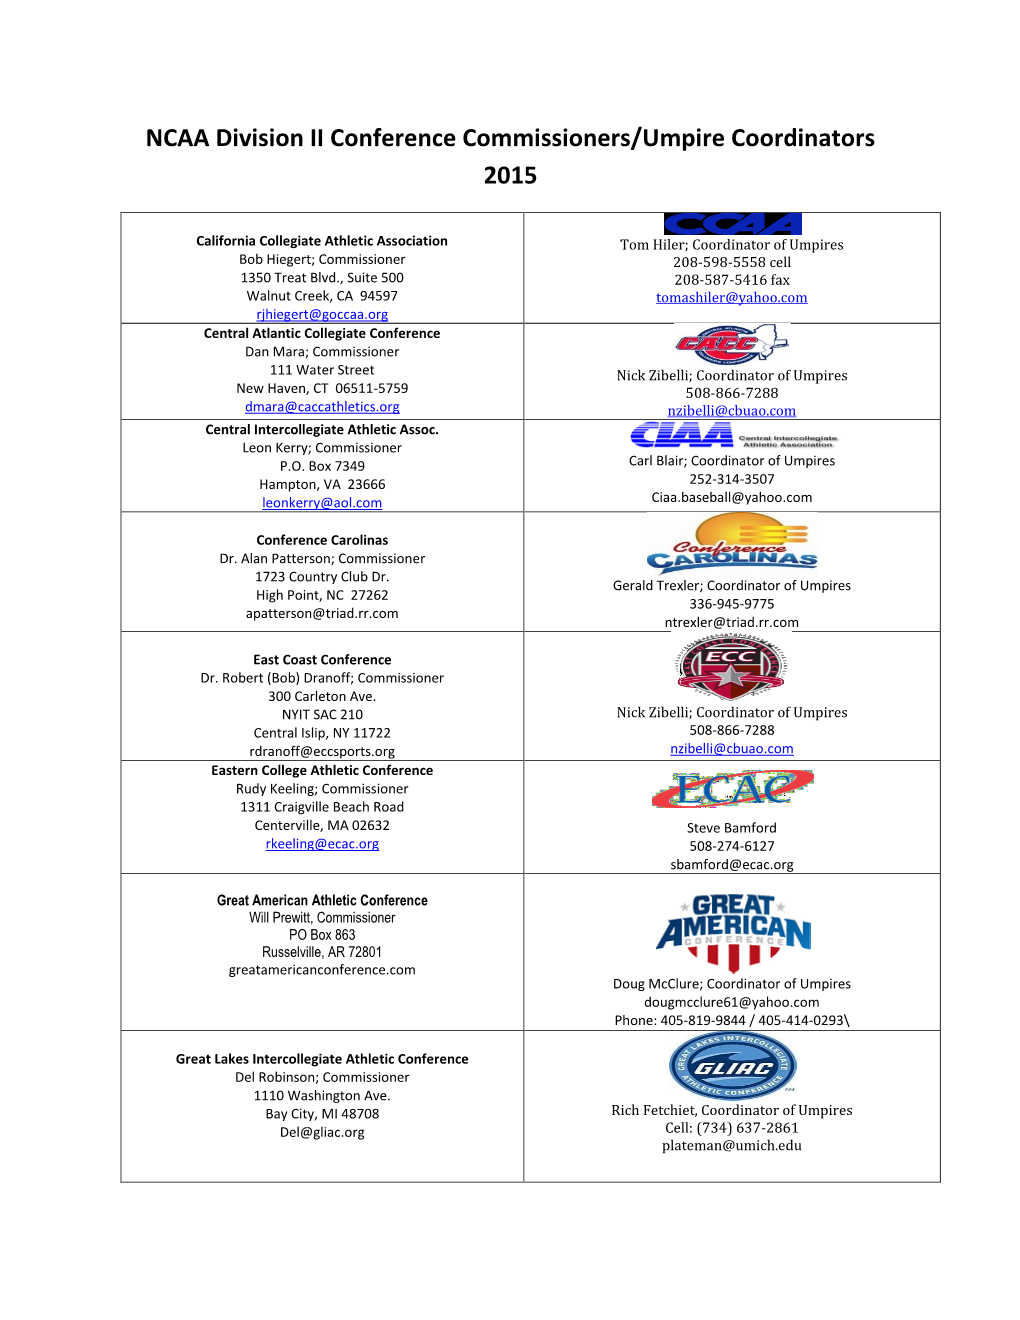 NCAA Division II Conference Commissioners/Umpire Coordinators 2015